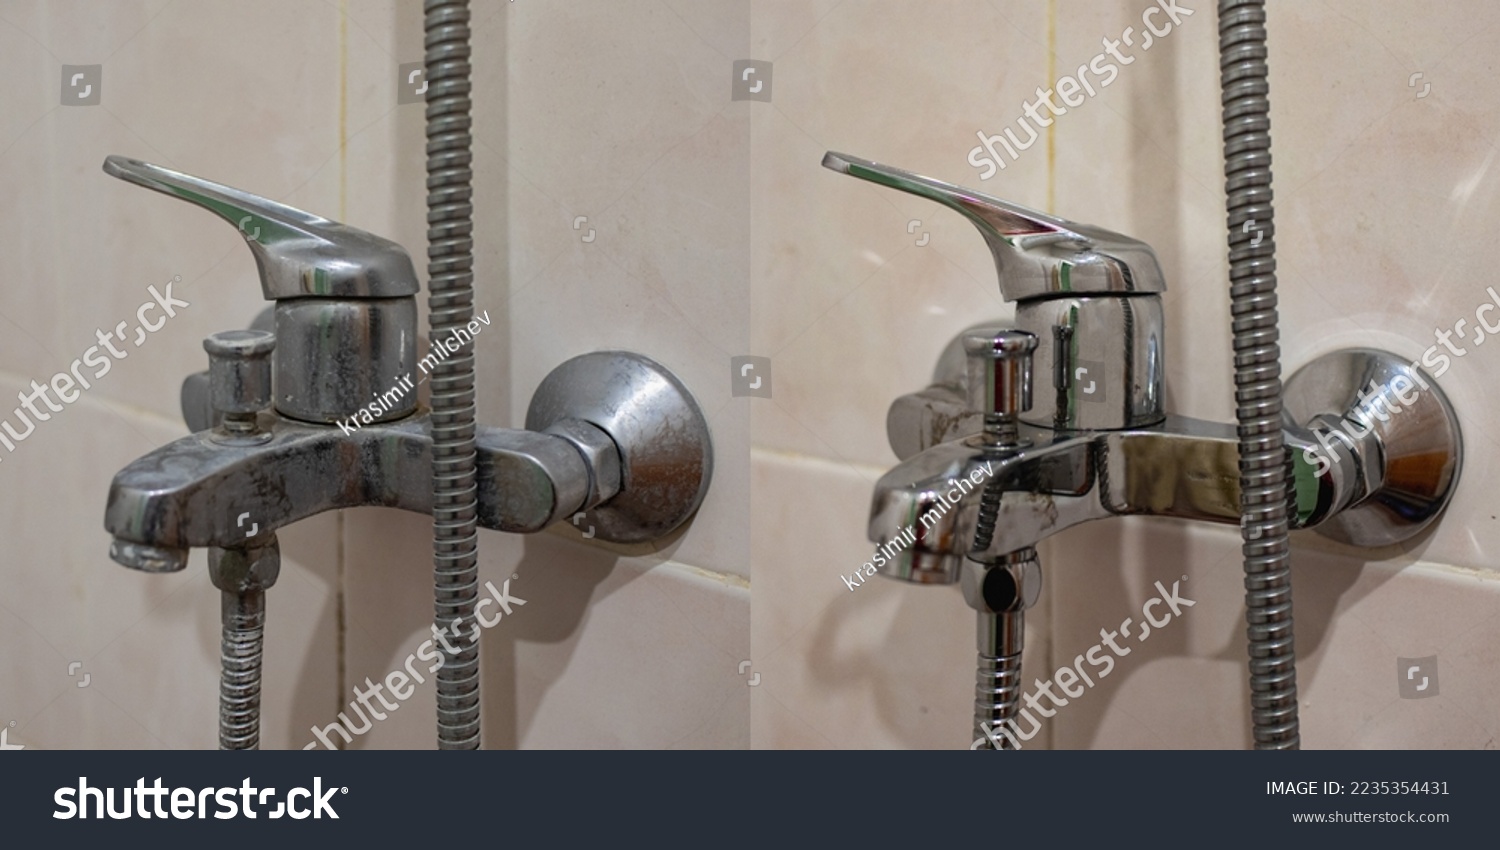 Before and after of a shower mixer. It had lime scale build up, but is now clean and shiny almost like new. #2235354431